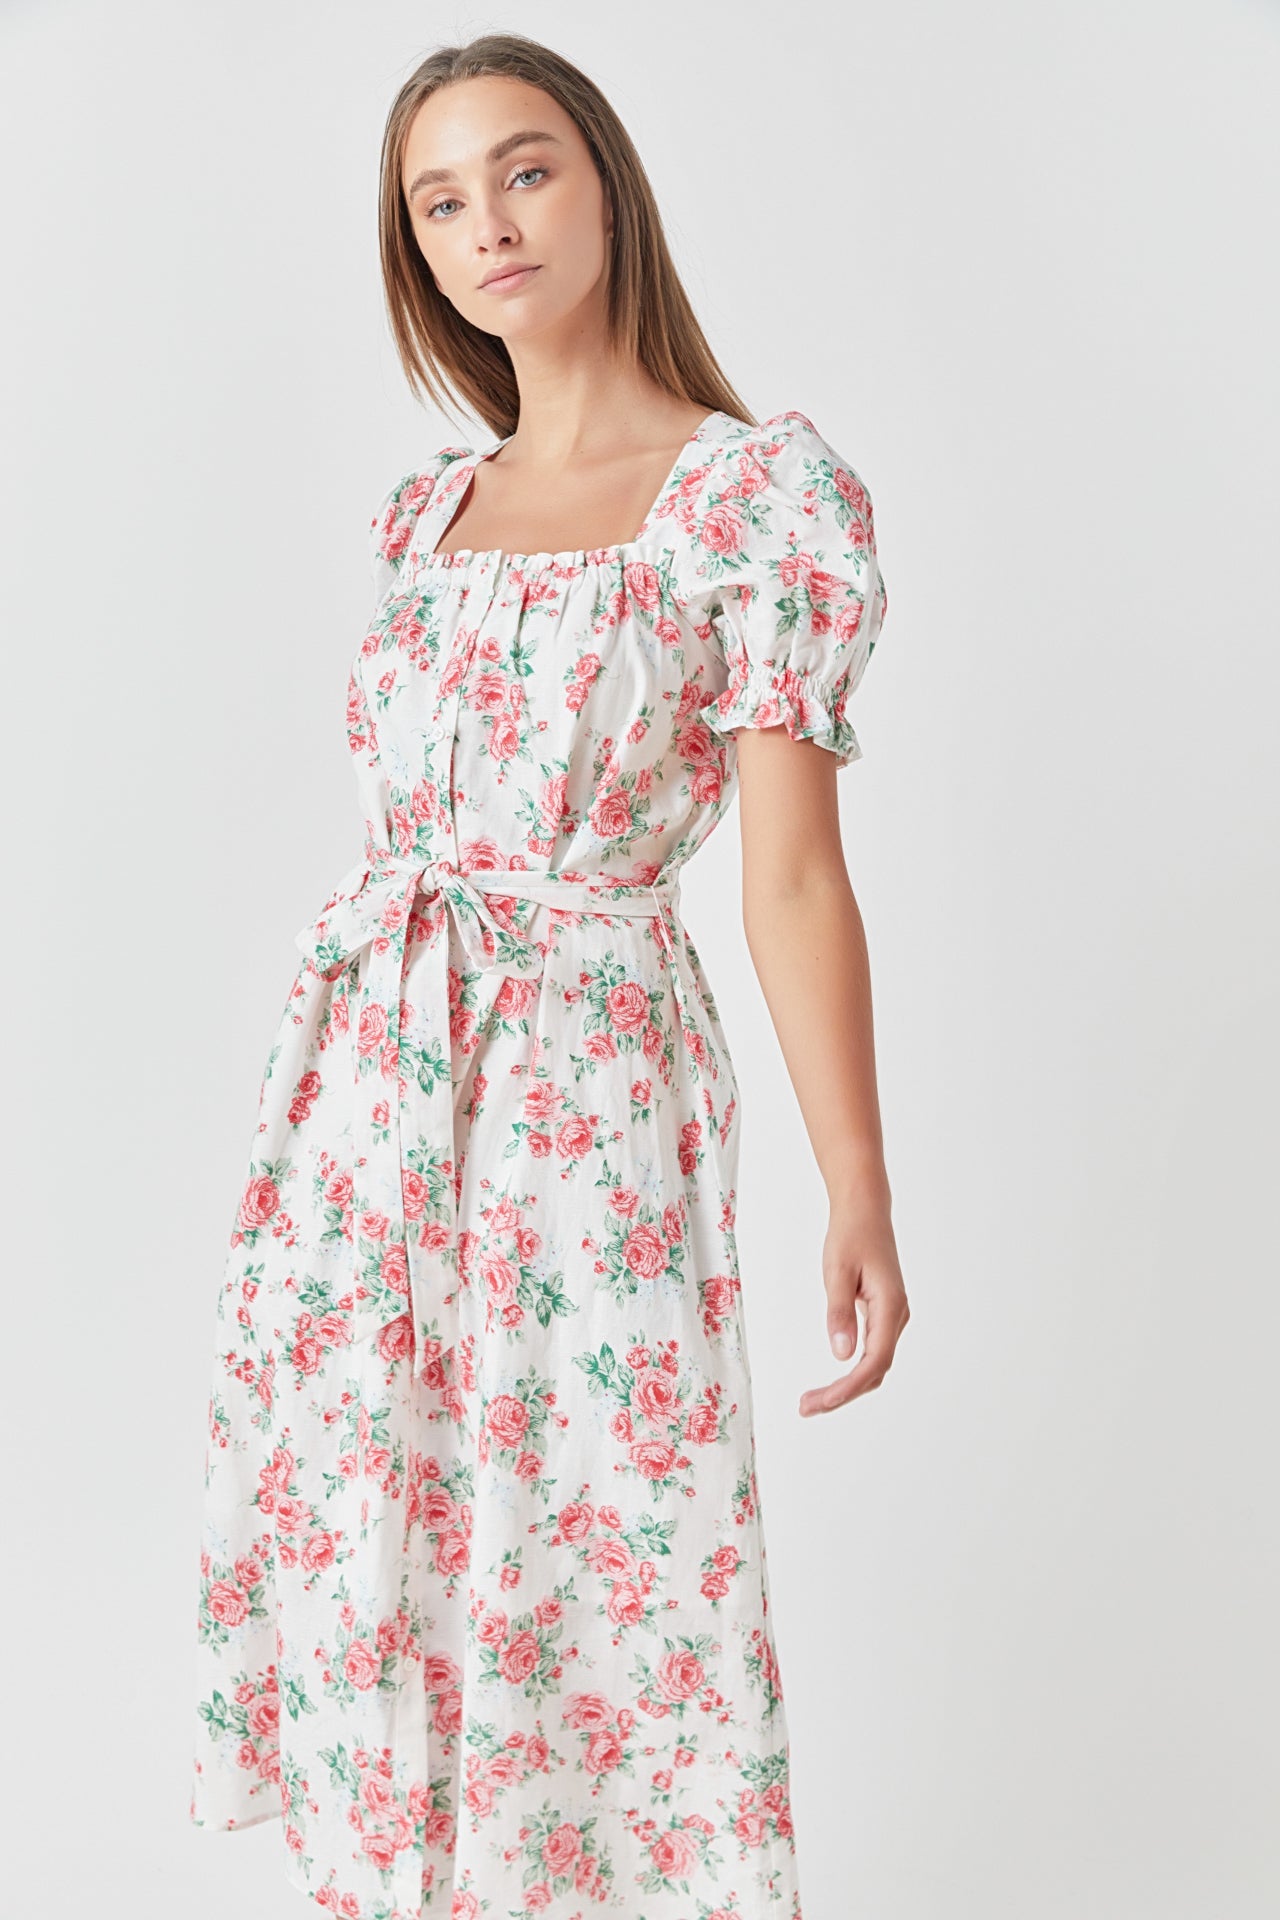 ENDLESS ROSE - Floral Print Linen Midi Dress - DRESSES available at Objectrare